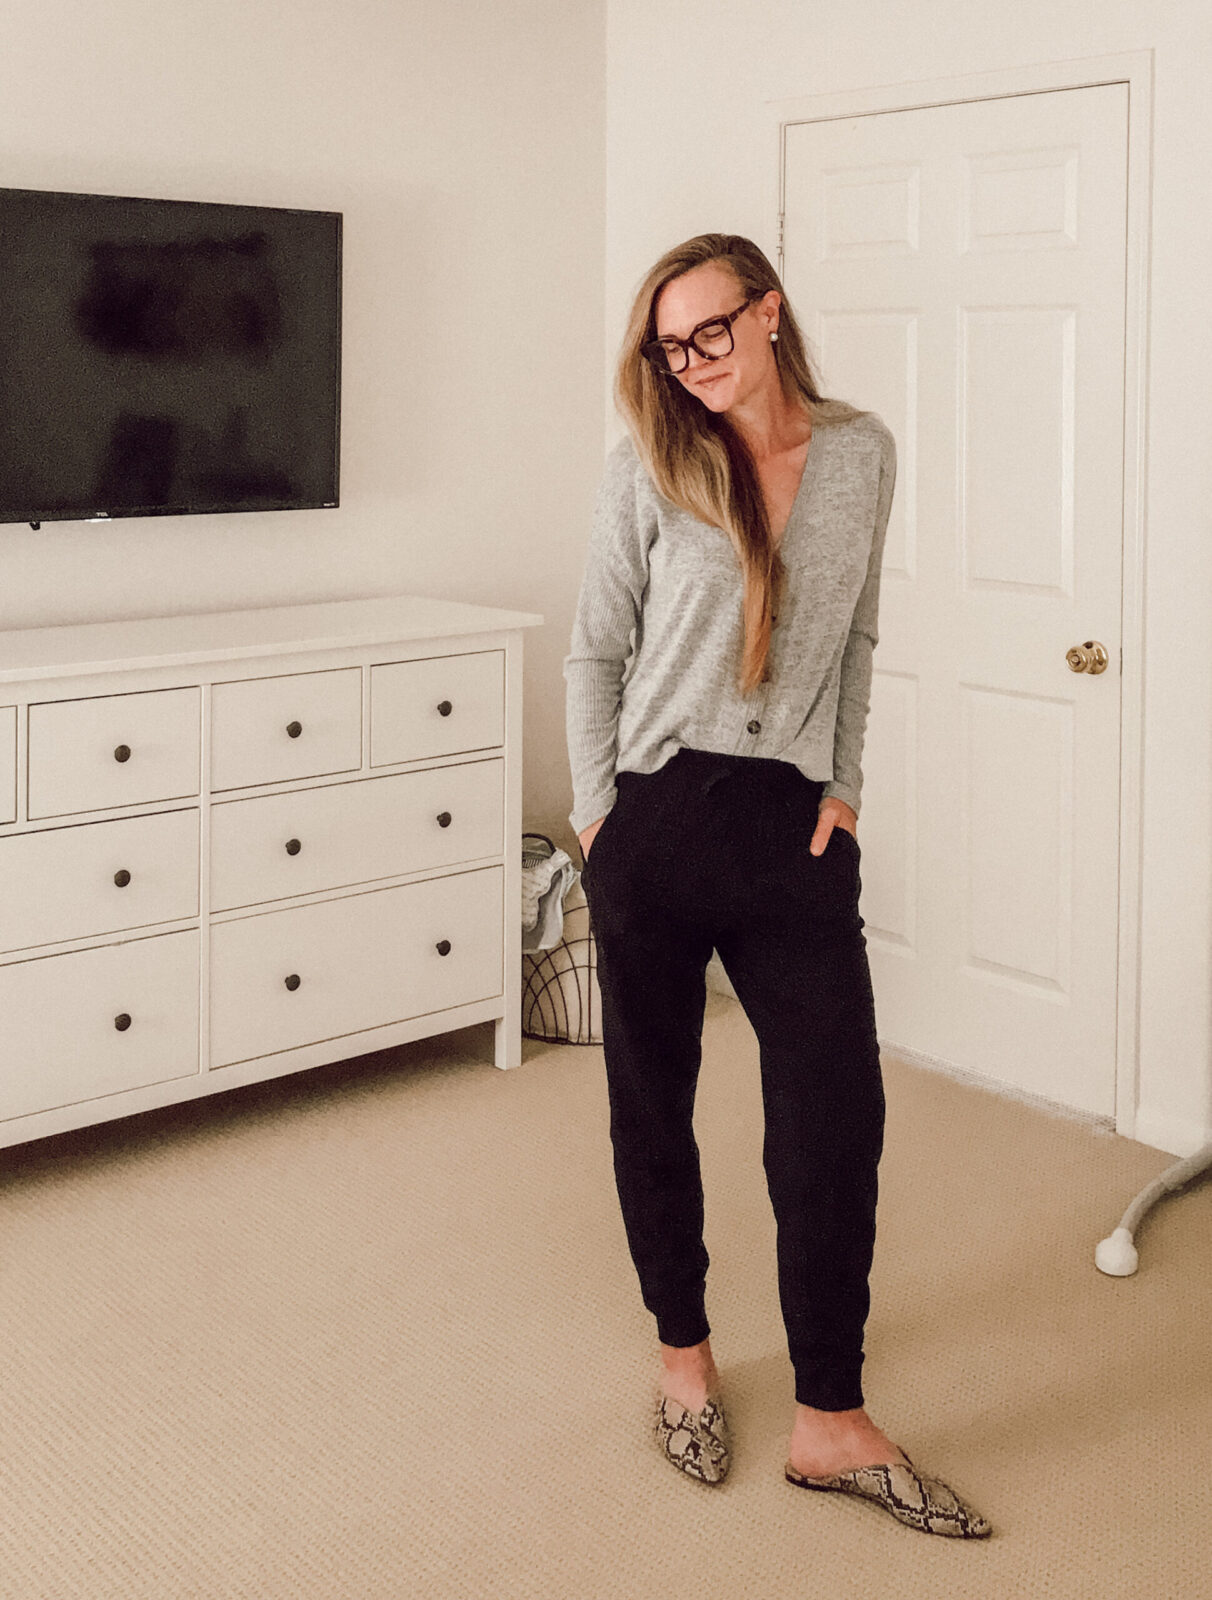 How to style high-waisted Jogging pants